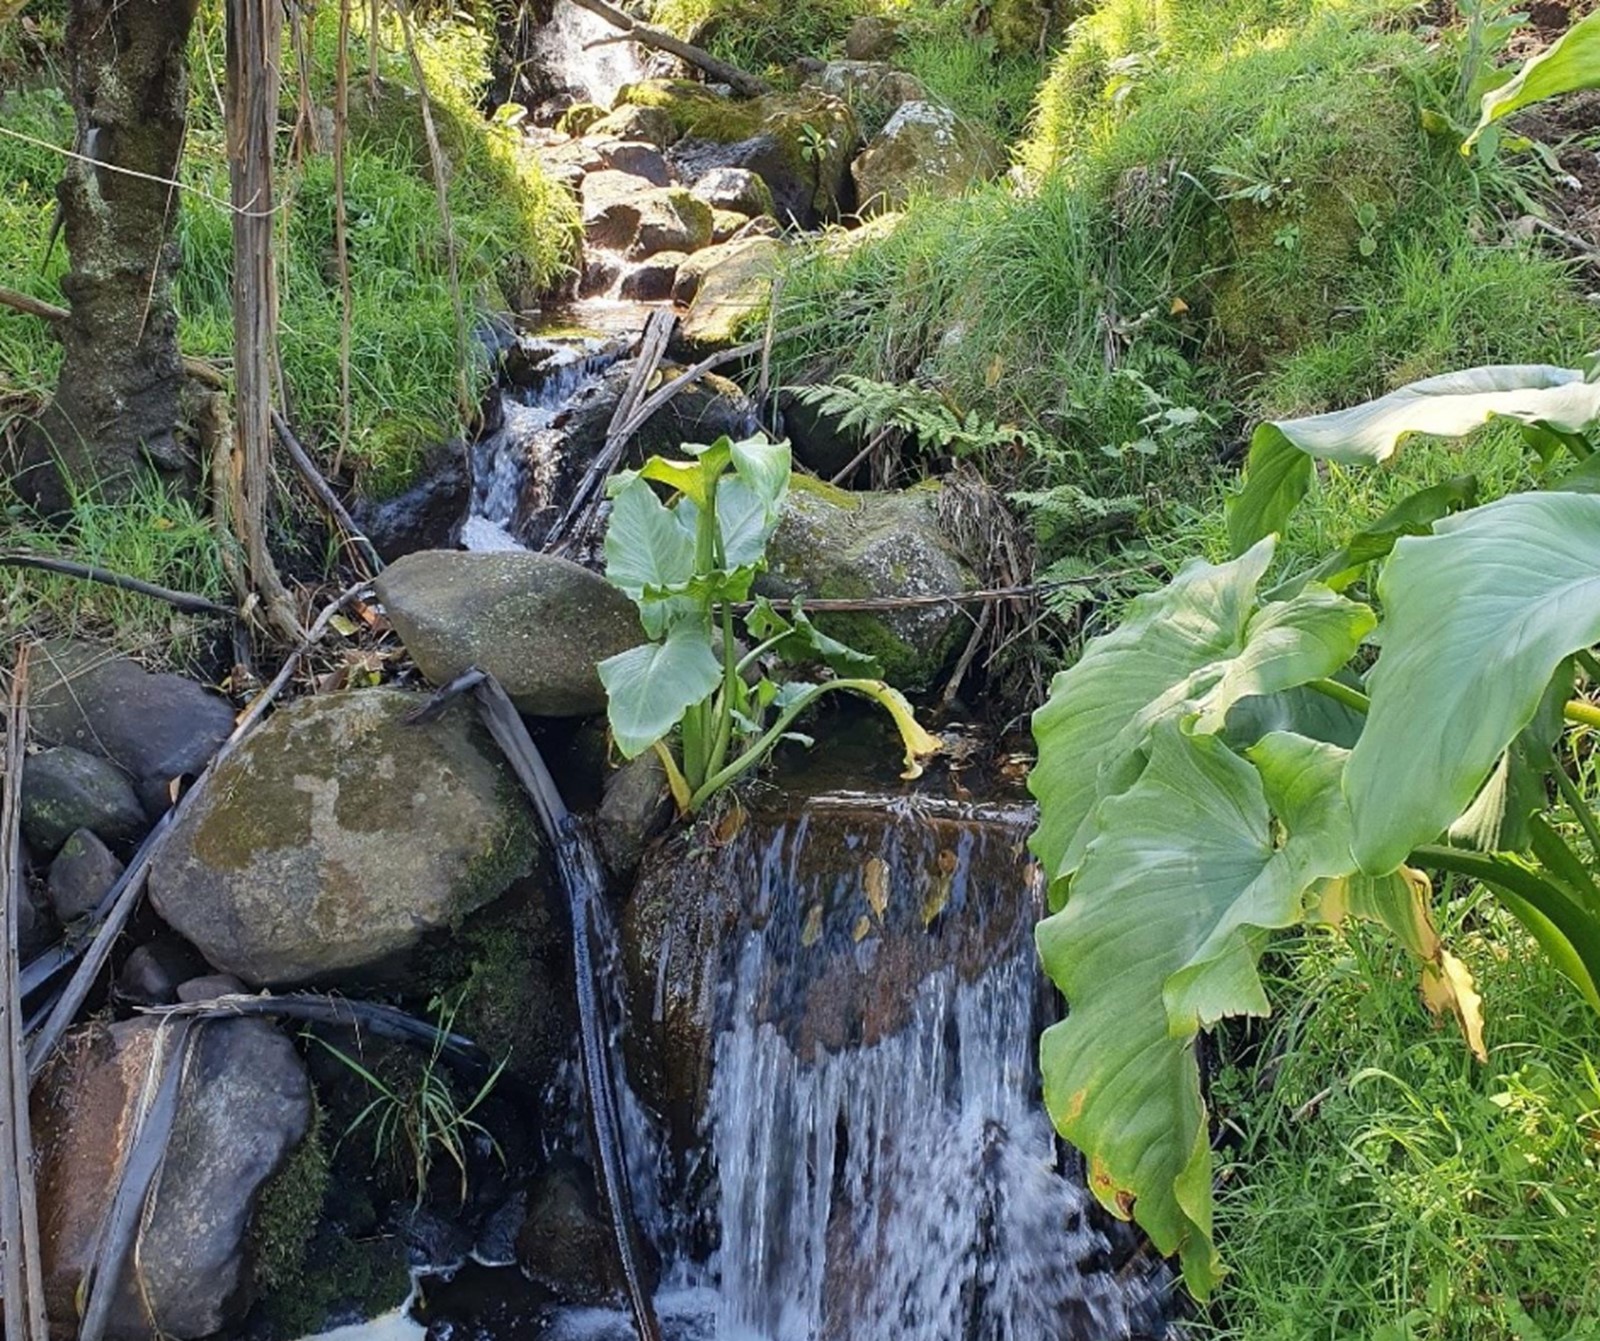 Section of a healthy stream, flowing open and clean.